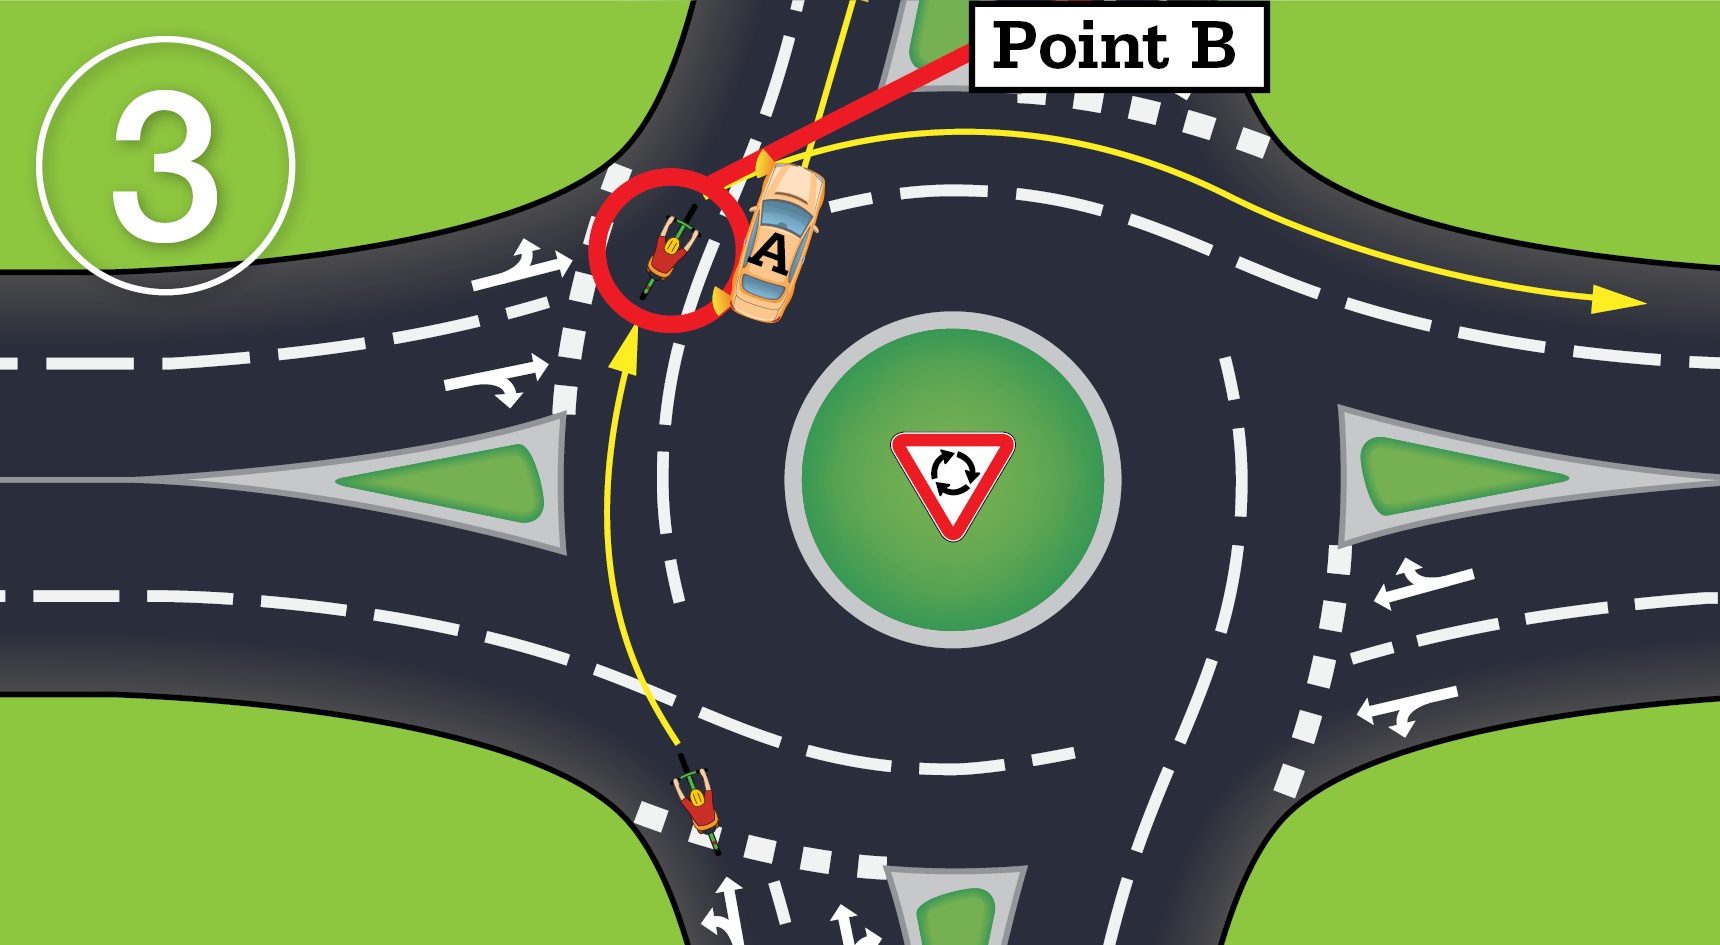 Our experts clear-up confusing roundabout rules